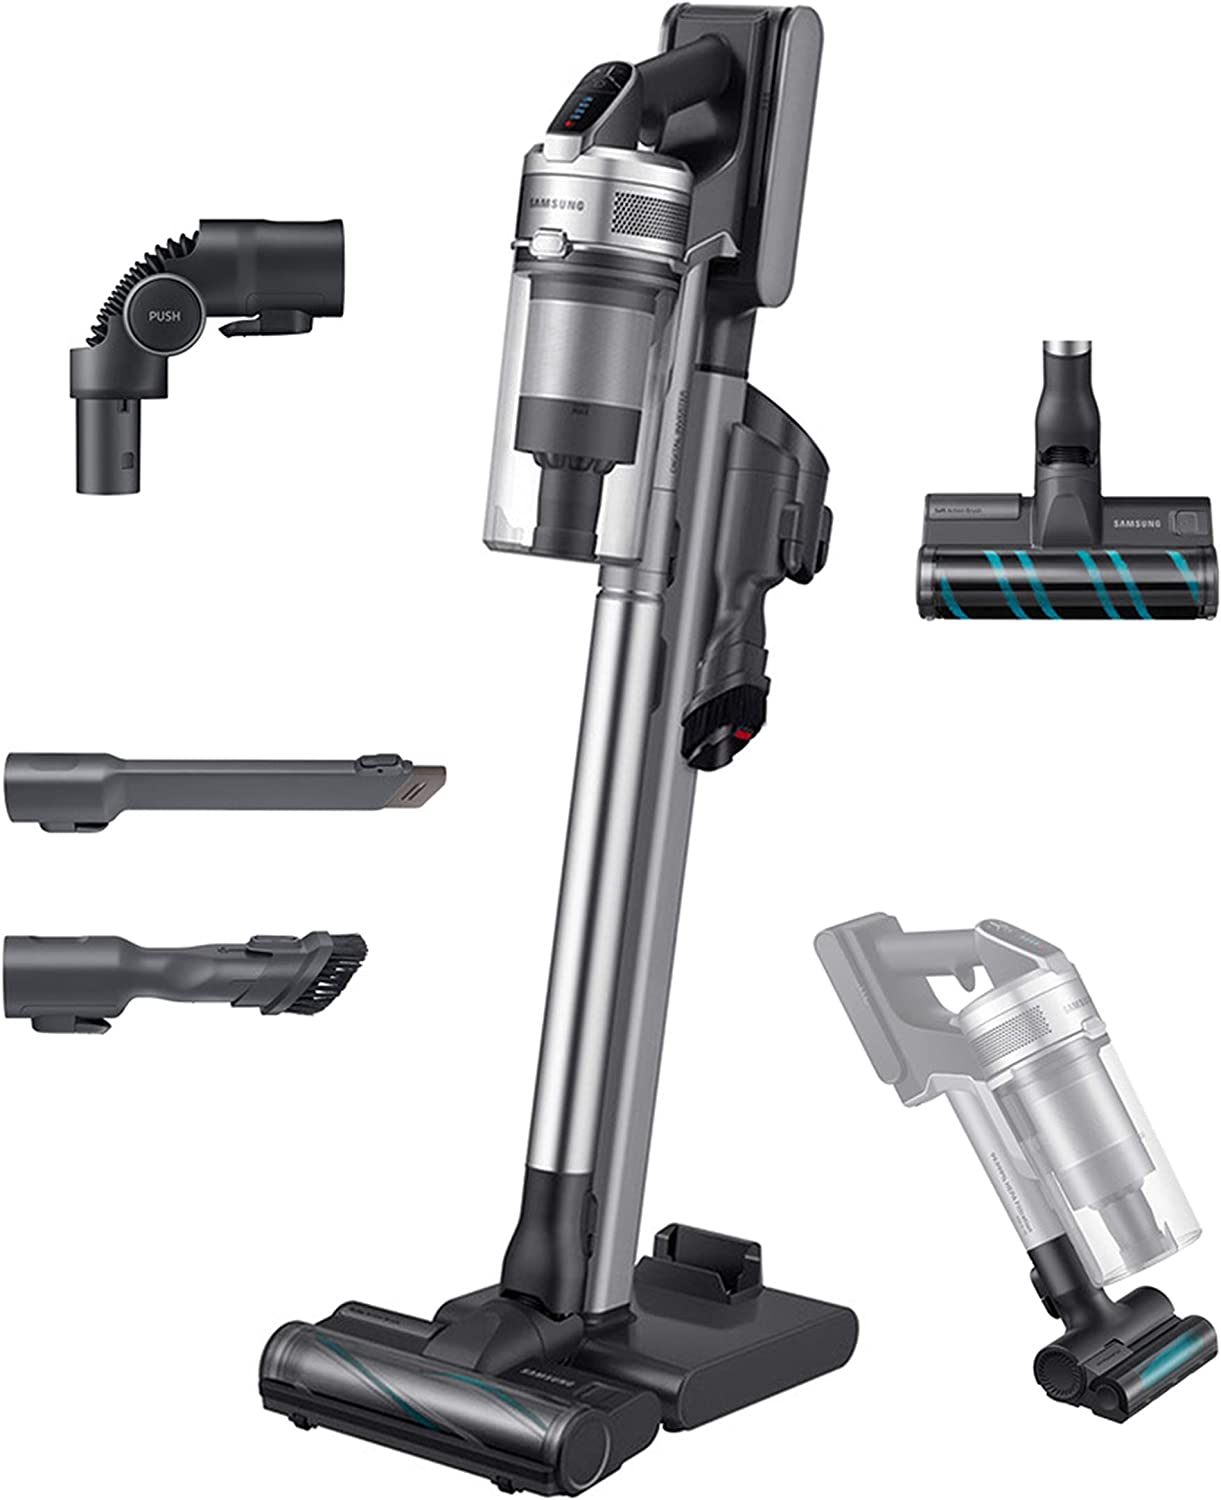 Samsung Jet 90 Stick Cordless Lightweight Vacuum Cleaner with Removable Long Lasting Battery and 200 Air Watt Suction Power, Complete with Telescopic Pipe, Titan Silver